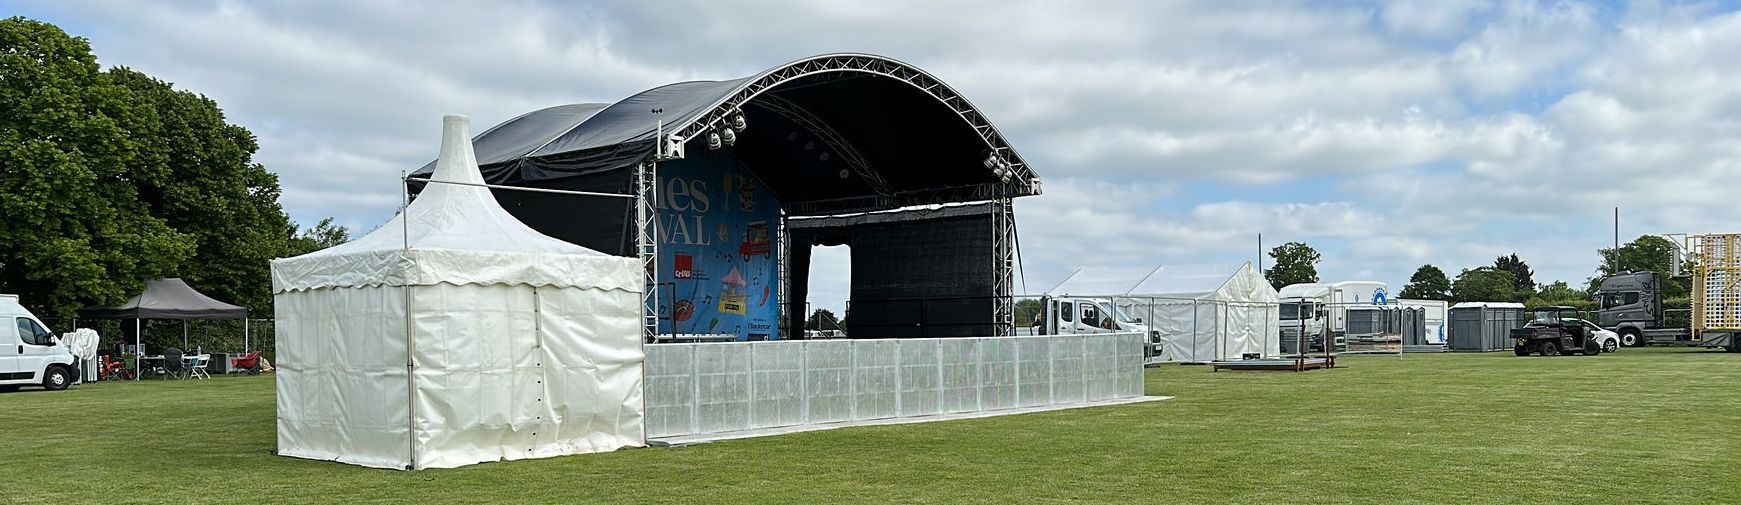 An arc truss stage set up in a field with crowd barriers and other marquees surrounding it